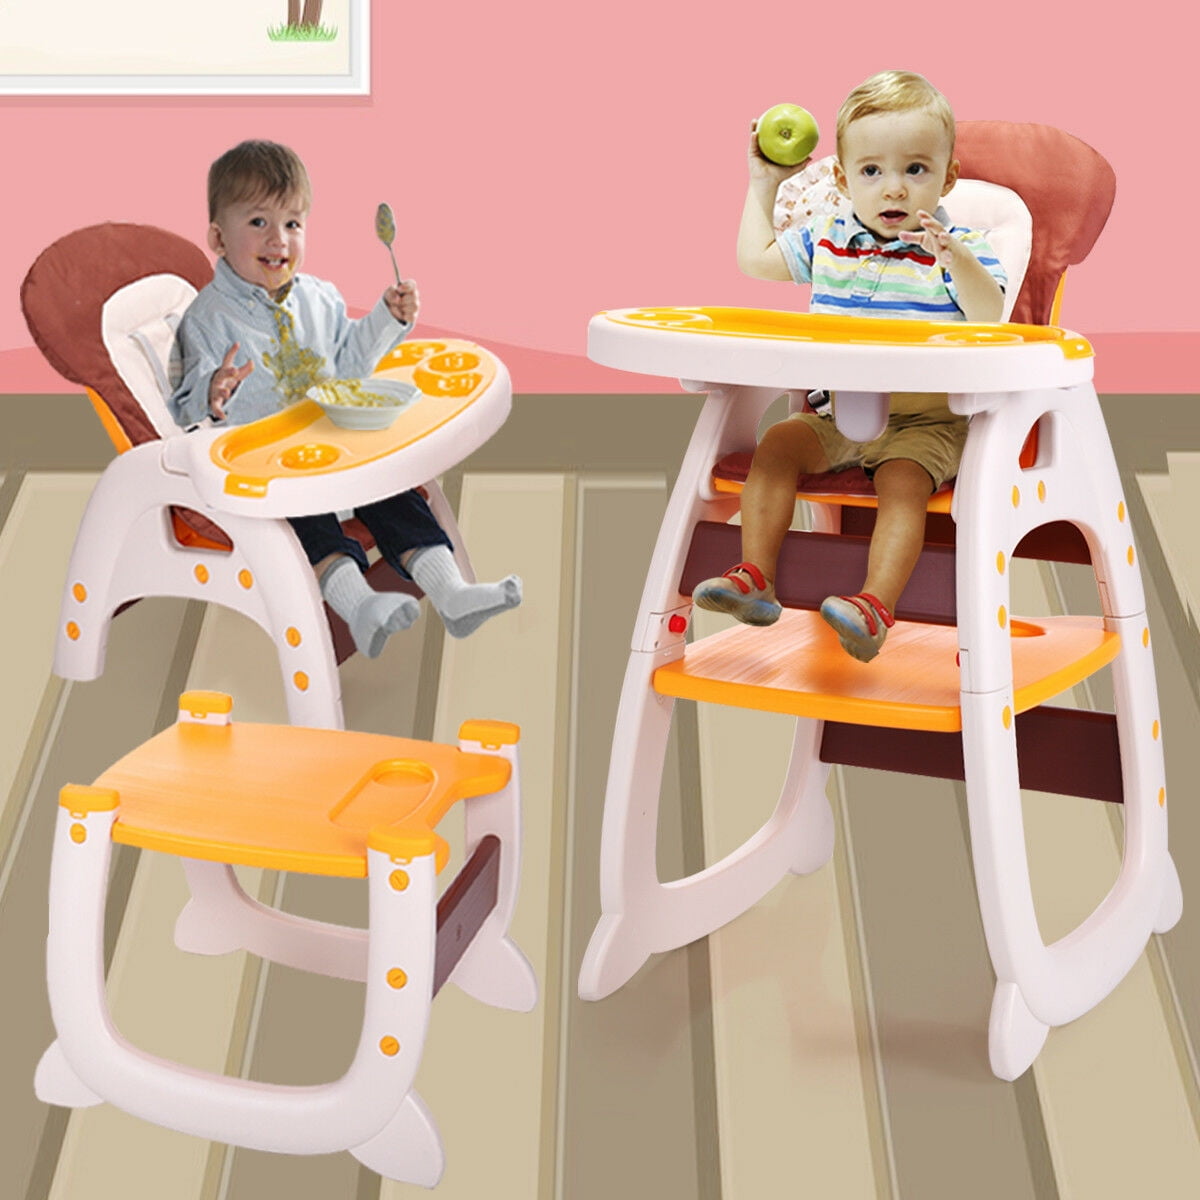 Infant 3in1 Convertible Play Table Seat High Chair Booster Toddler Feeding Tray 